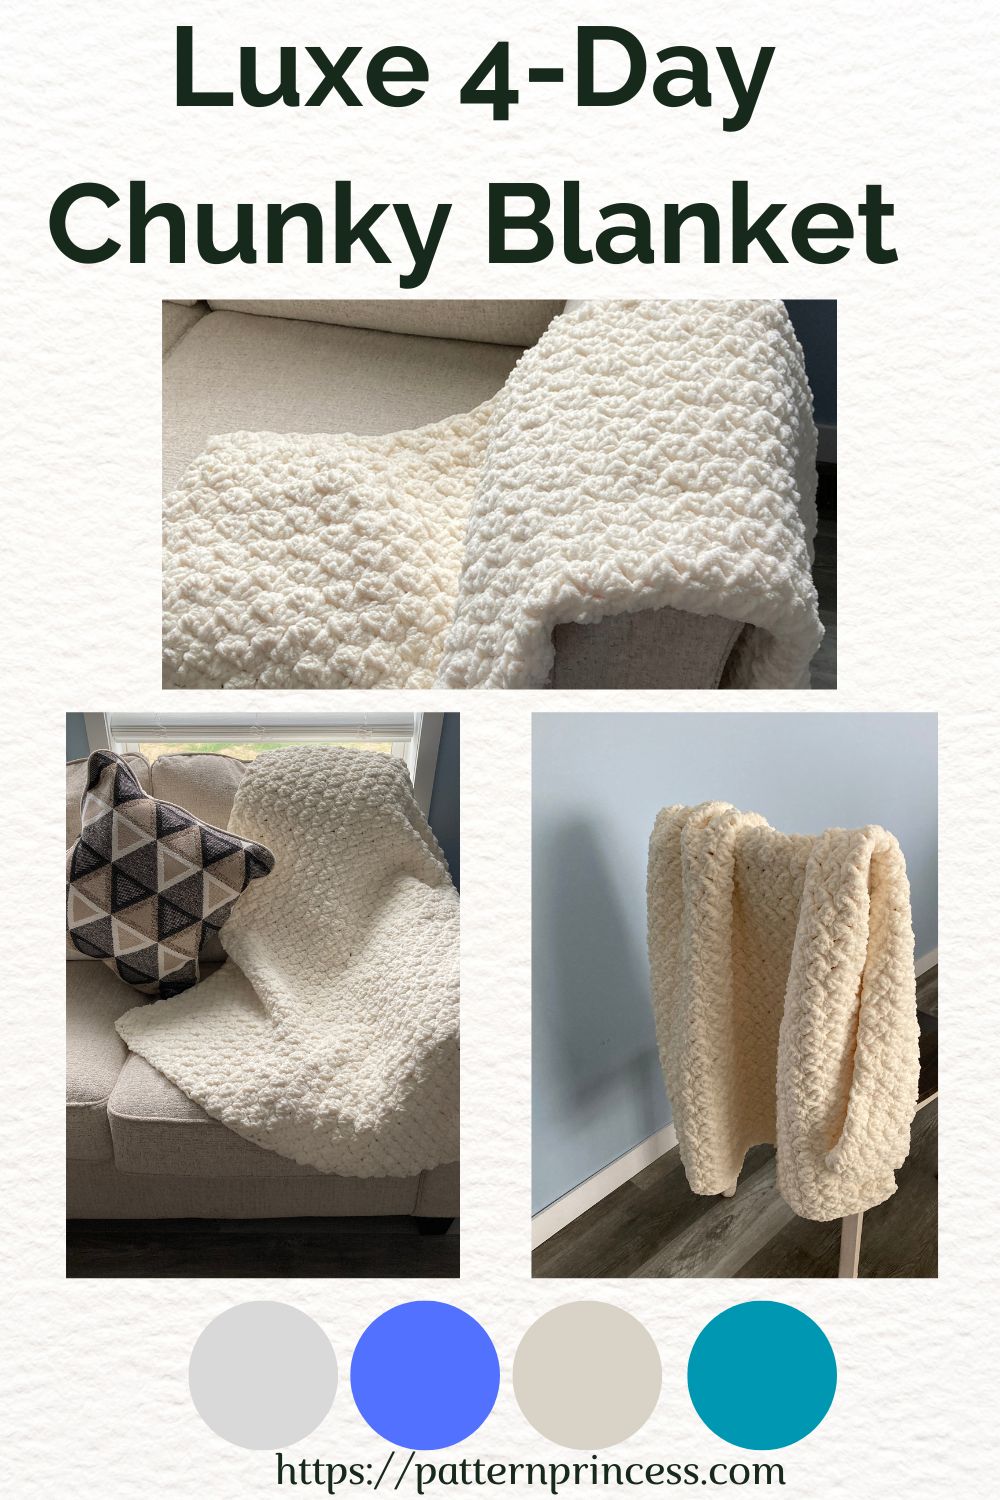 Luxe 4-Day Chunky Blanket